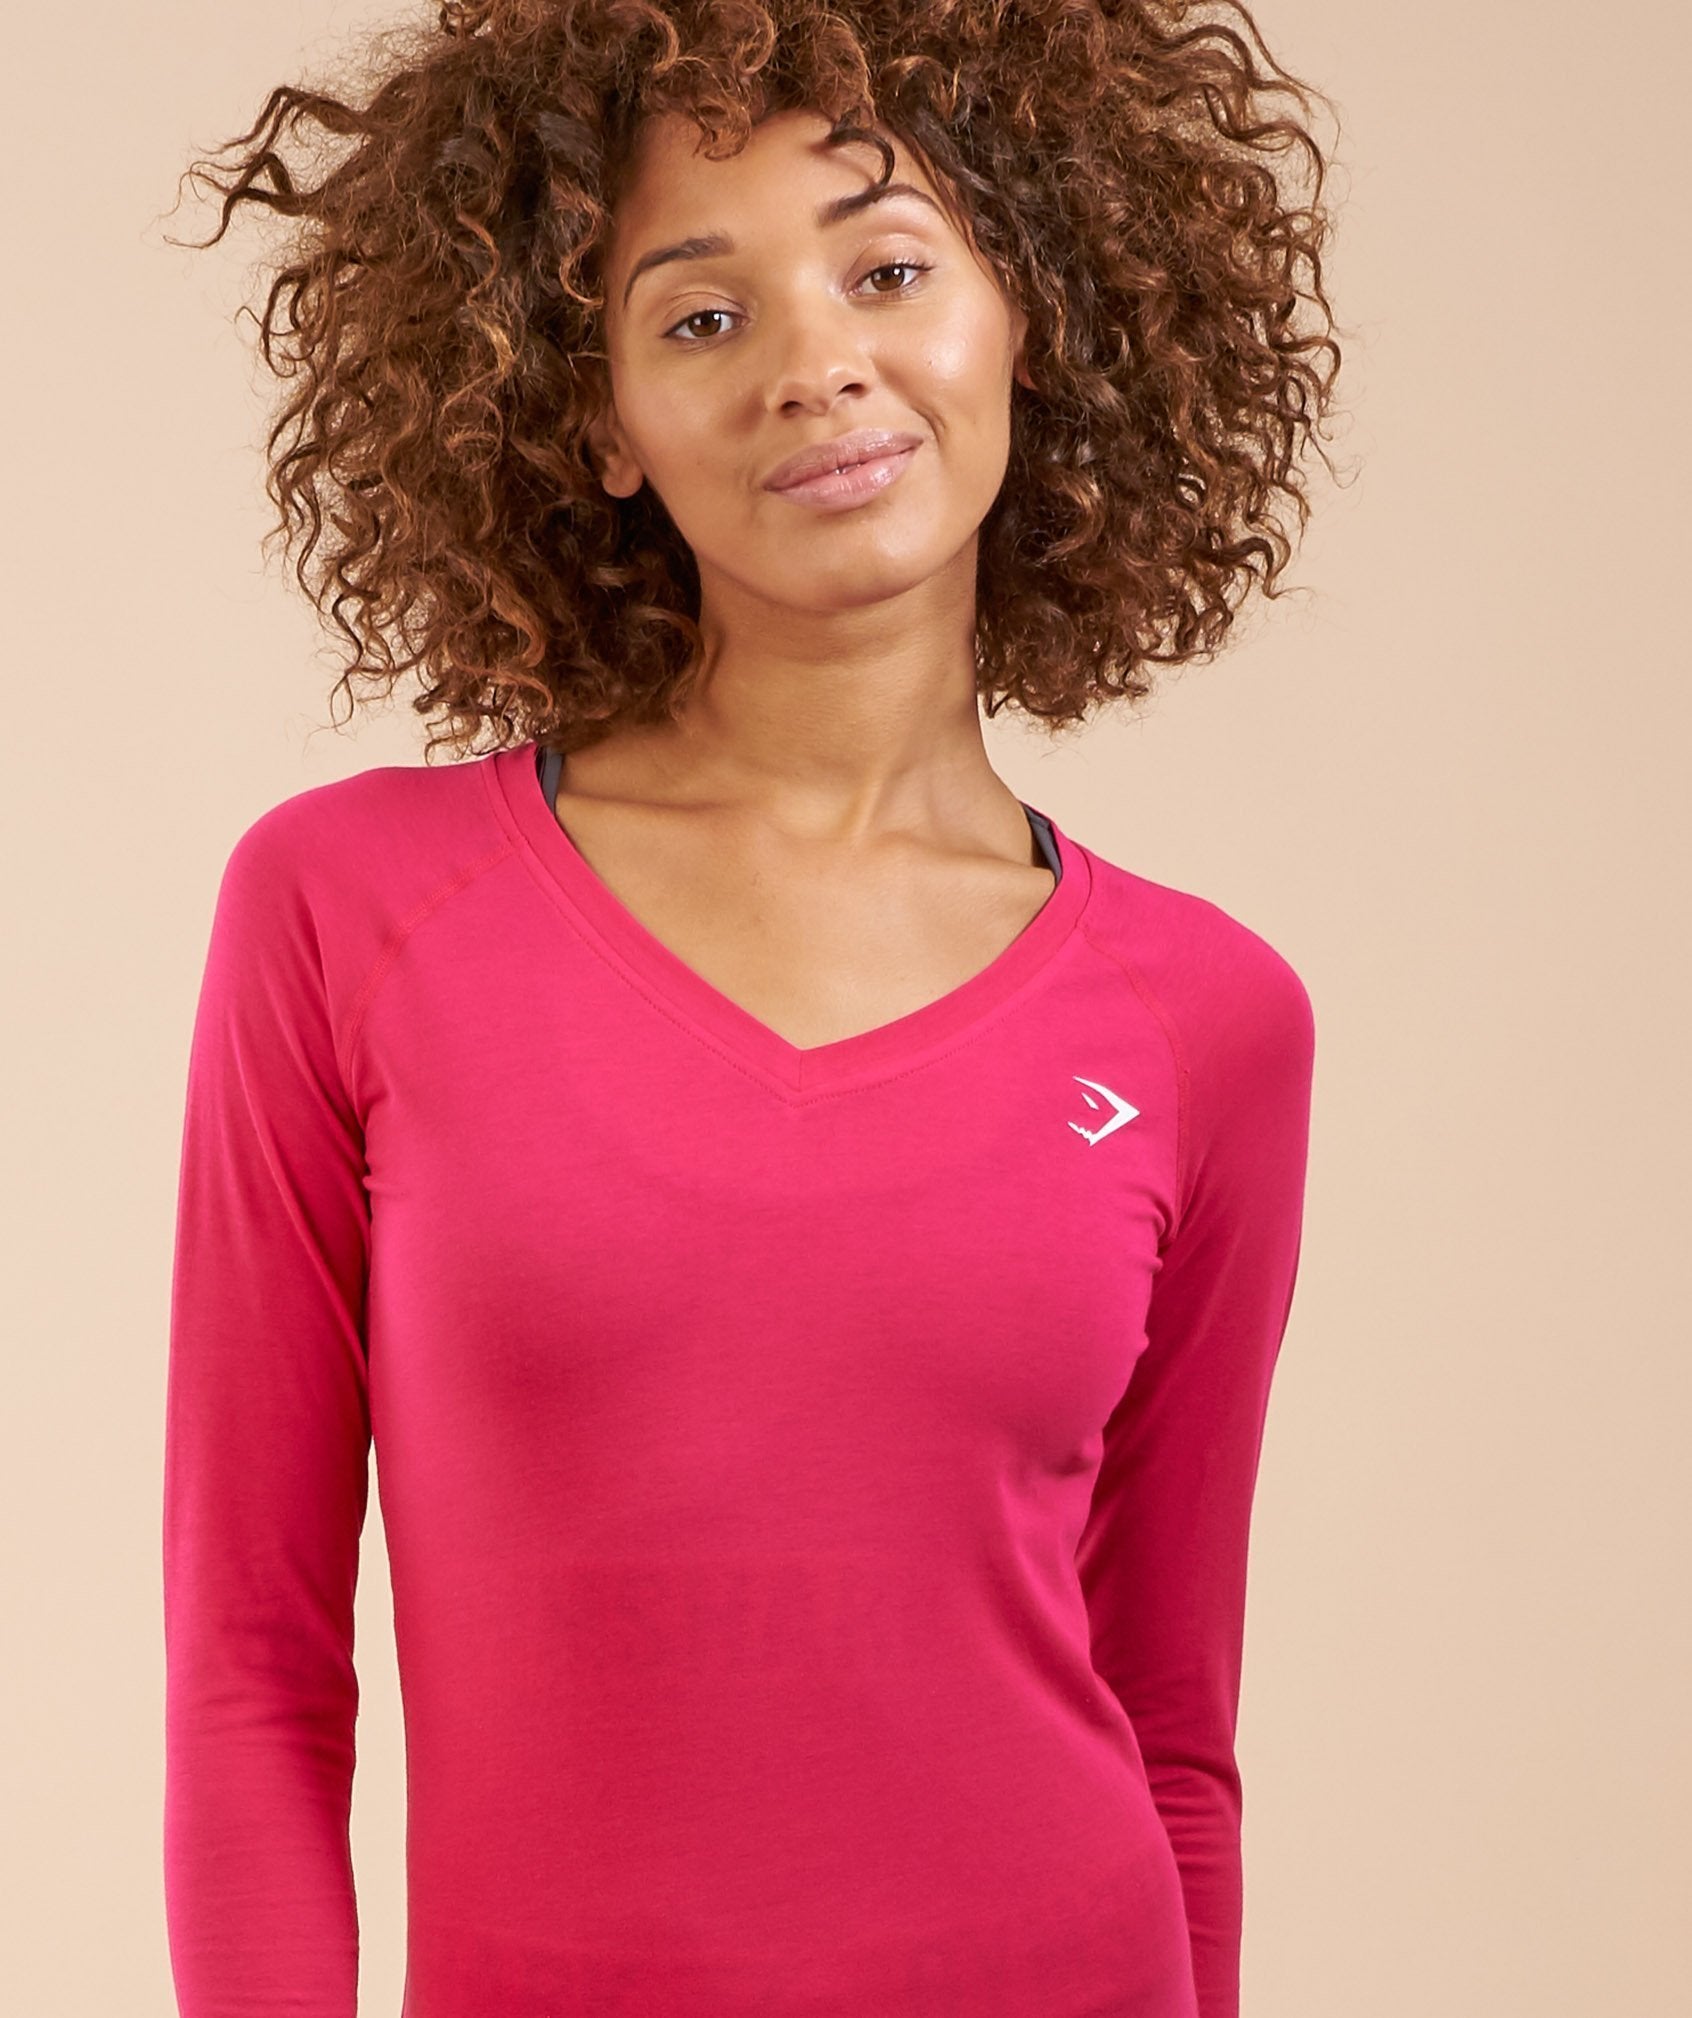 Verve Long Sleeve T-Shirt in Cranberry - view 6